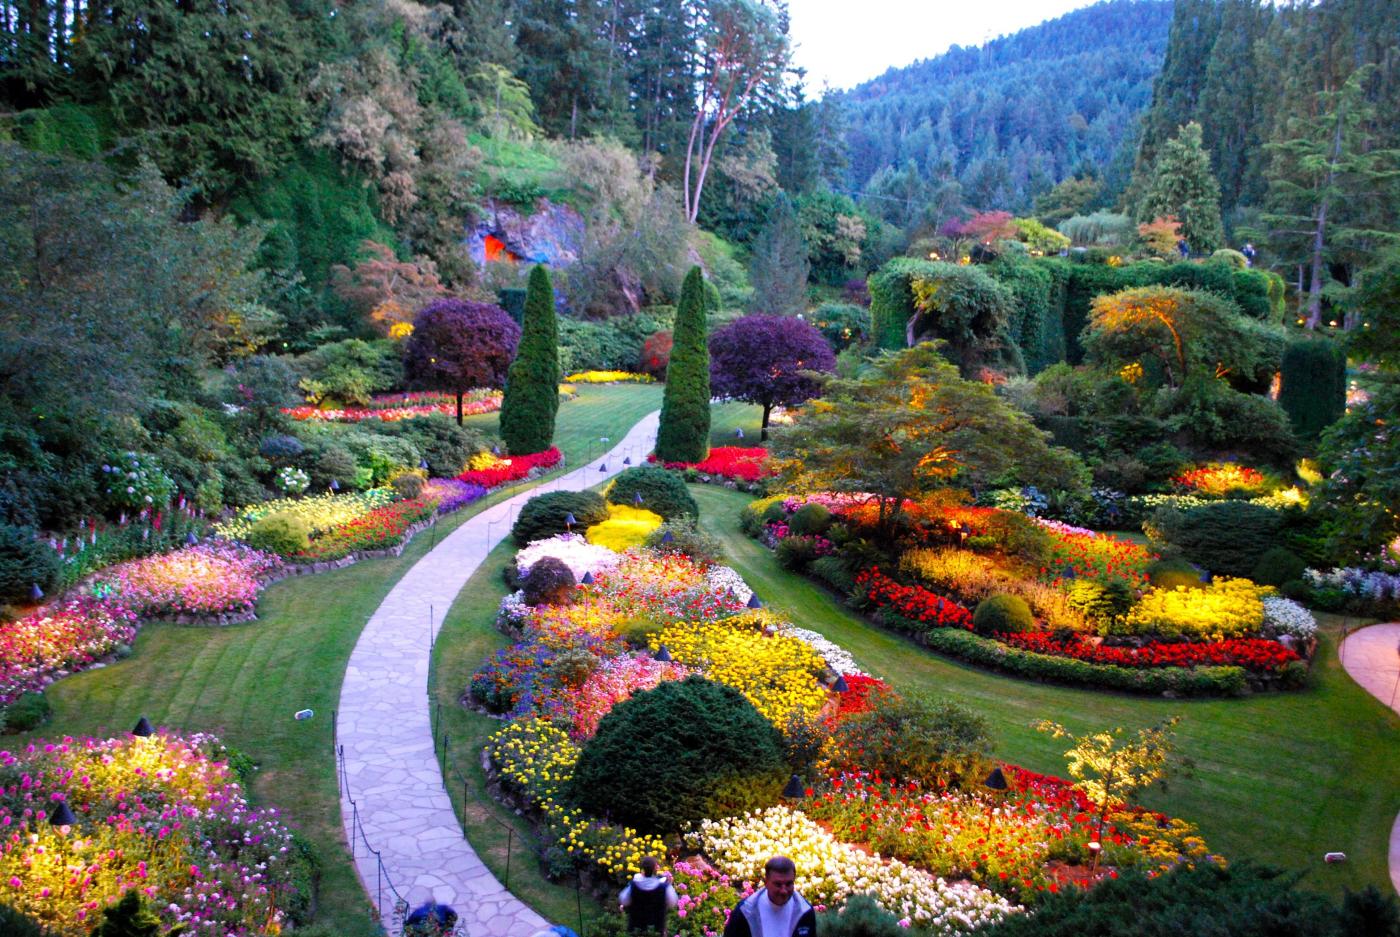 historic-downtown-and-butchart-gardens-victoria-bc-canada-1.jpg